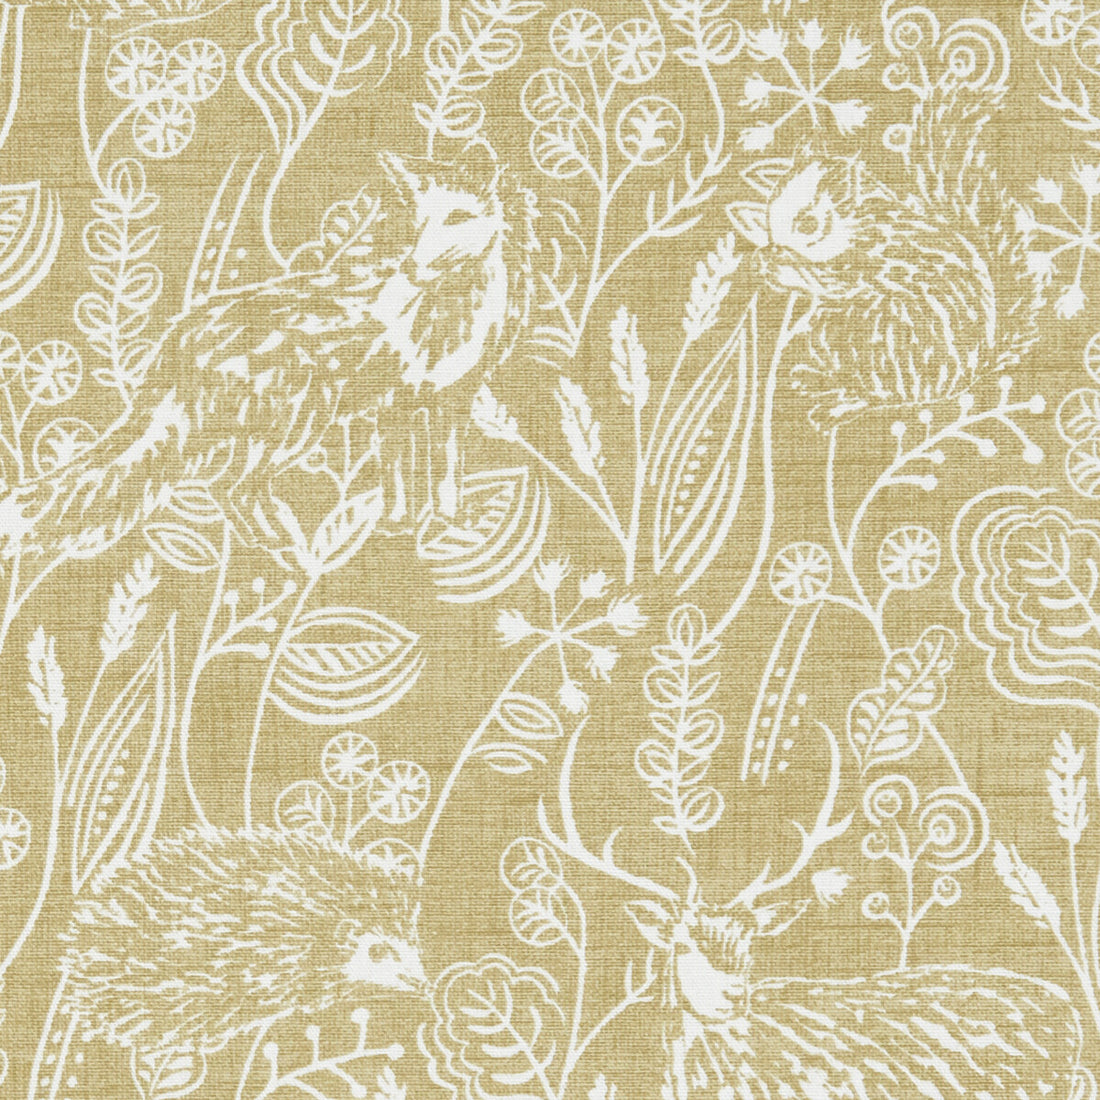 Westleton fabric in ochre color - pattern F1197/02.CAC.0 - by Clarke And Clarke in the Land &amp; Sea By Studio G For C&amp;C collection